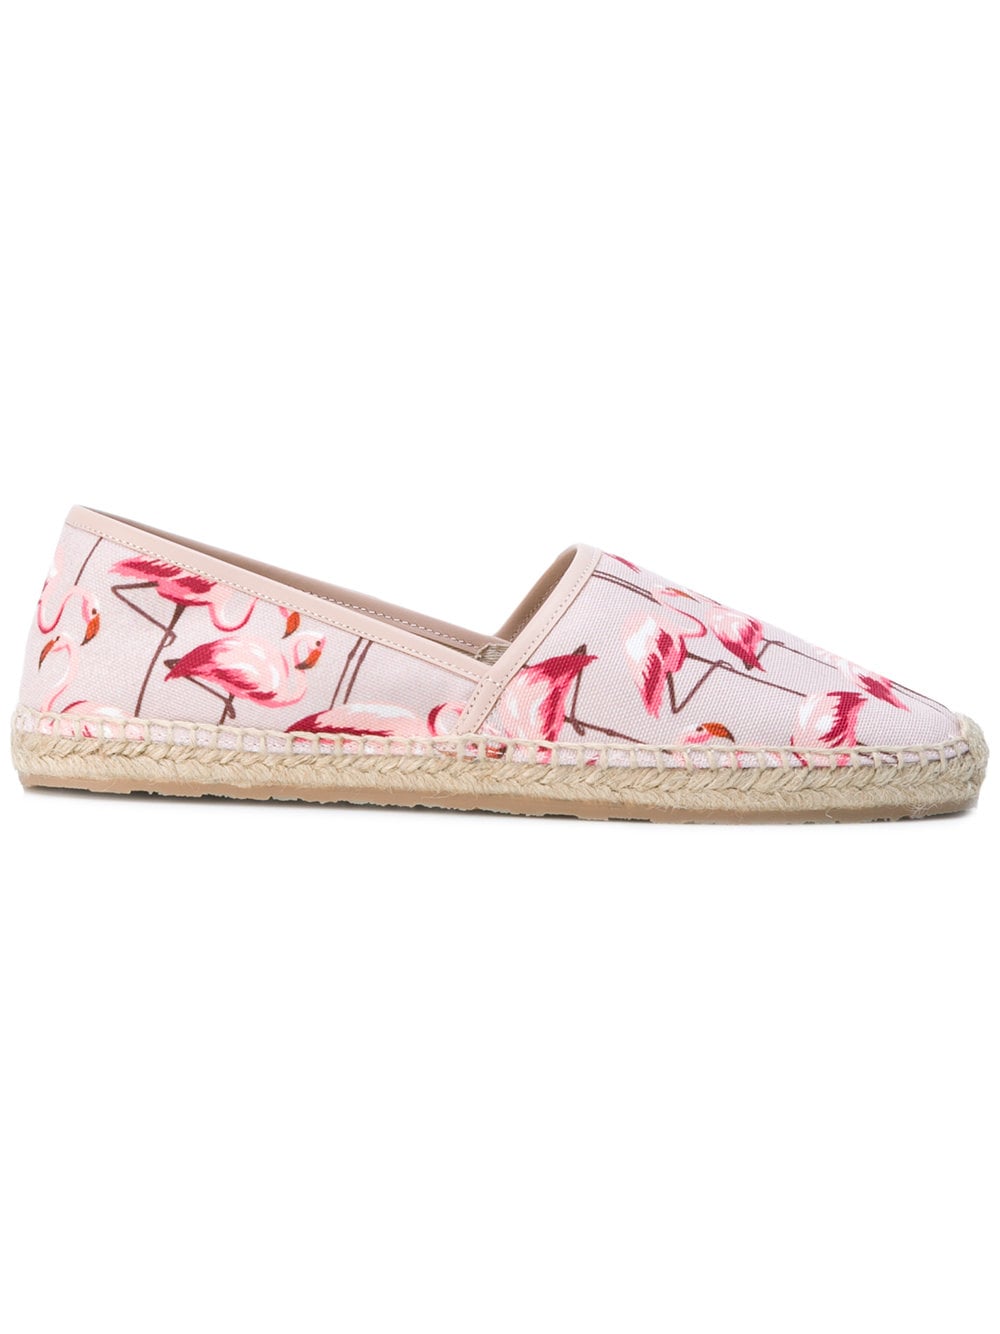 masse plads enkelt gang Red Valentino Flamingo Print Espadrilles | These Statement-Making  Espadrilles Are About to Change Your Summer Shoe Game | POPSUGAR Fashion  Photo 20